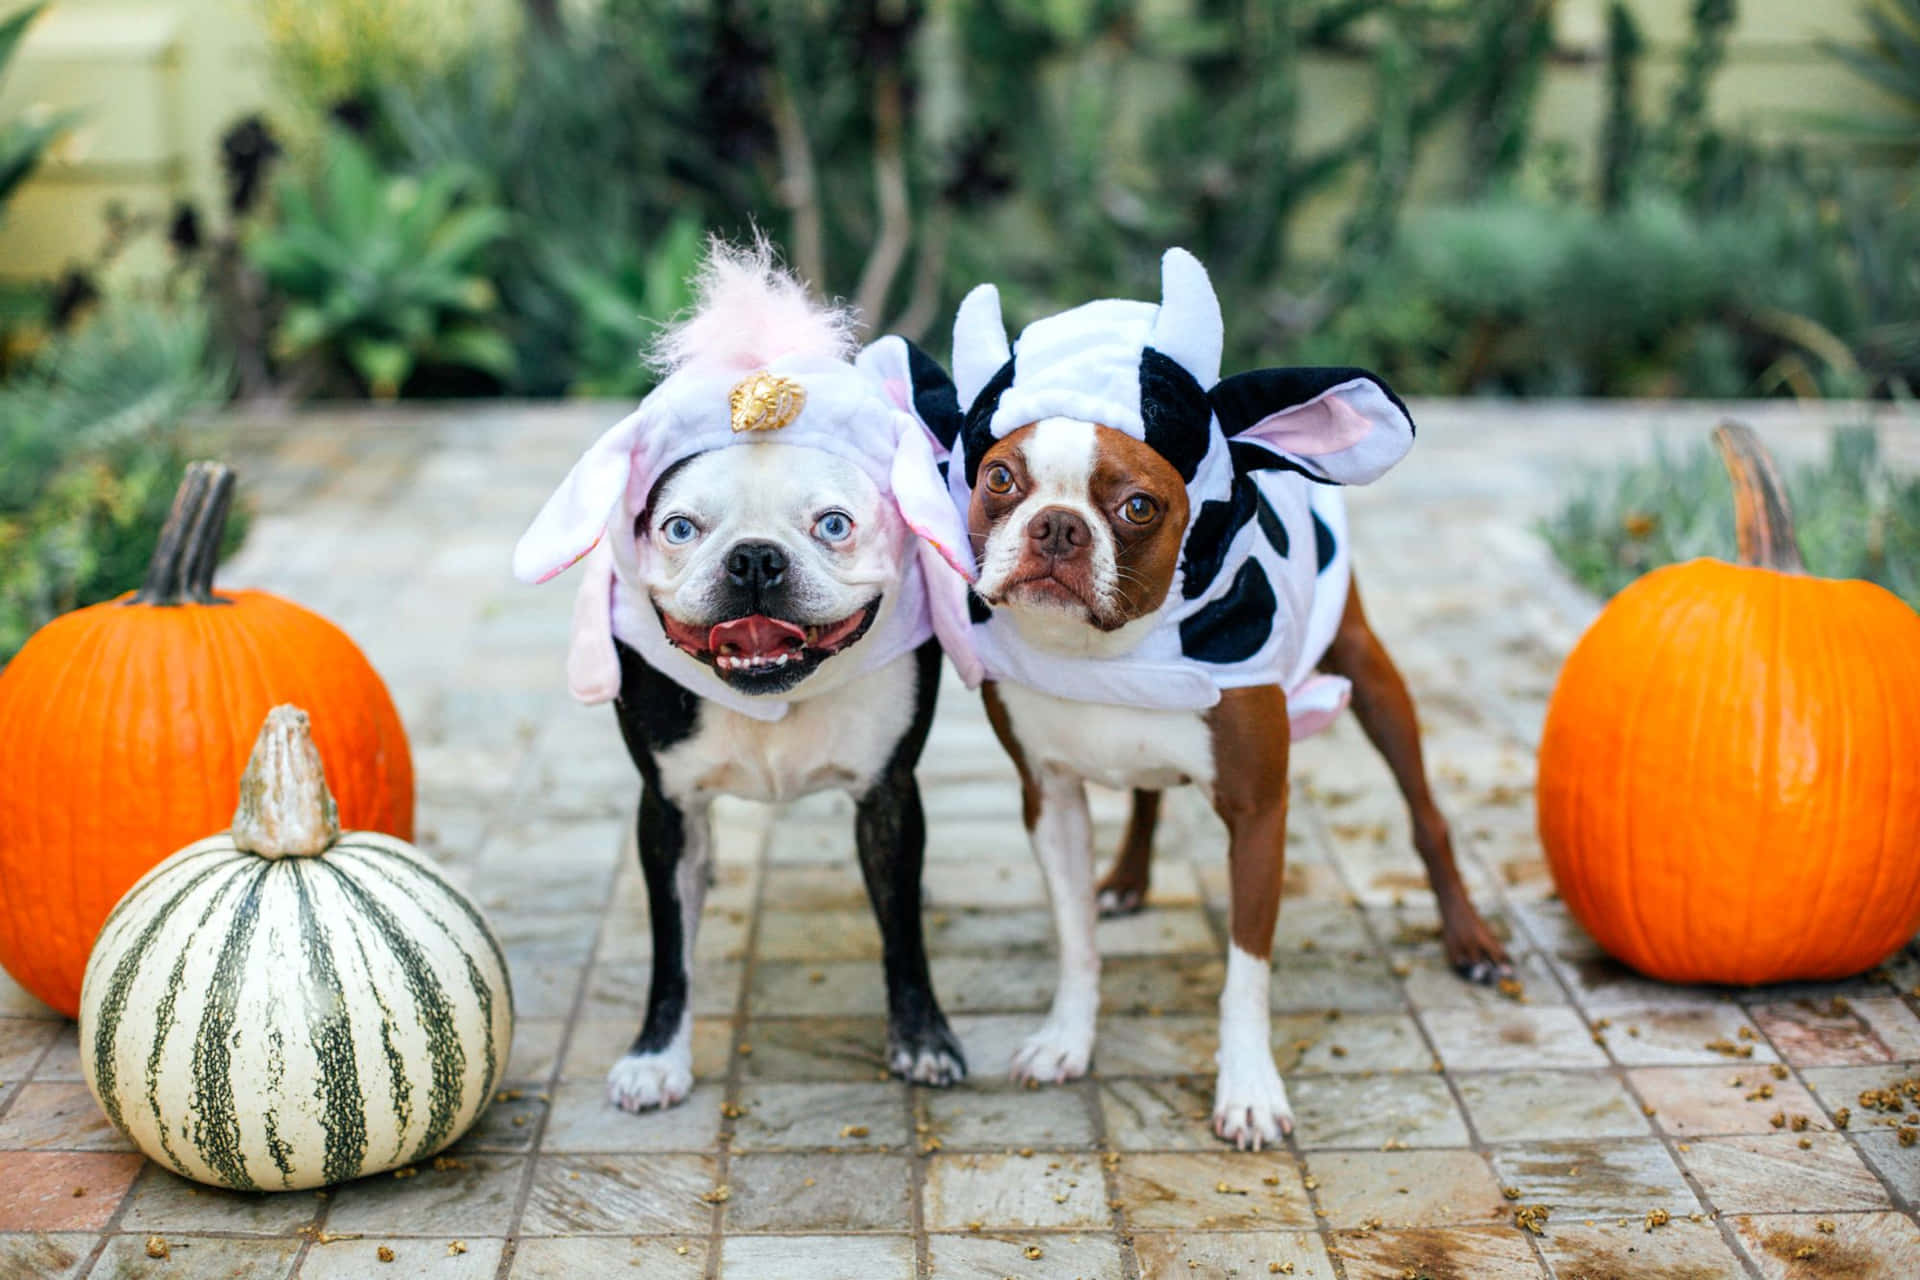 Get the whole family into the spooky spirit with matching pet costumes! Wallpaper